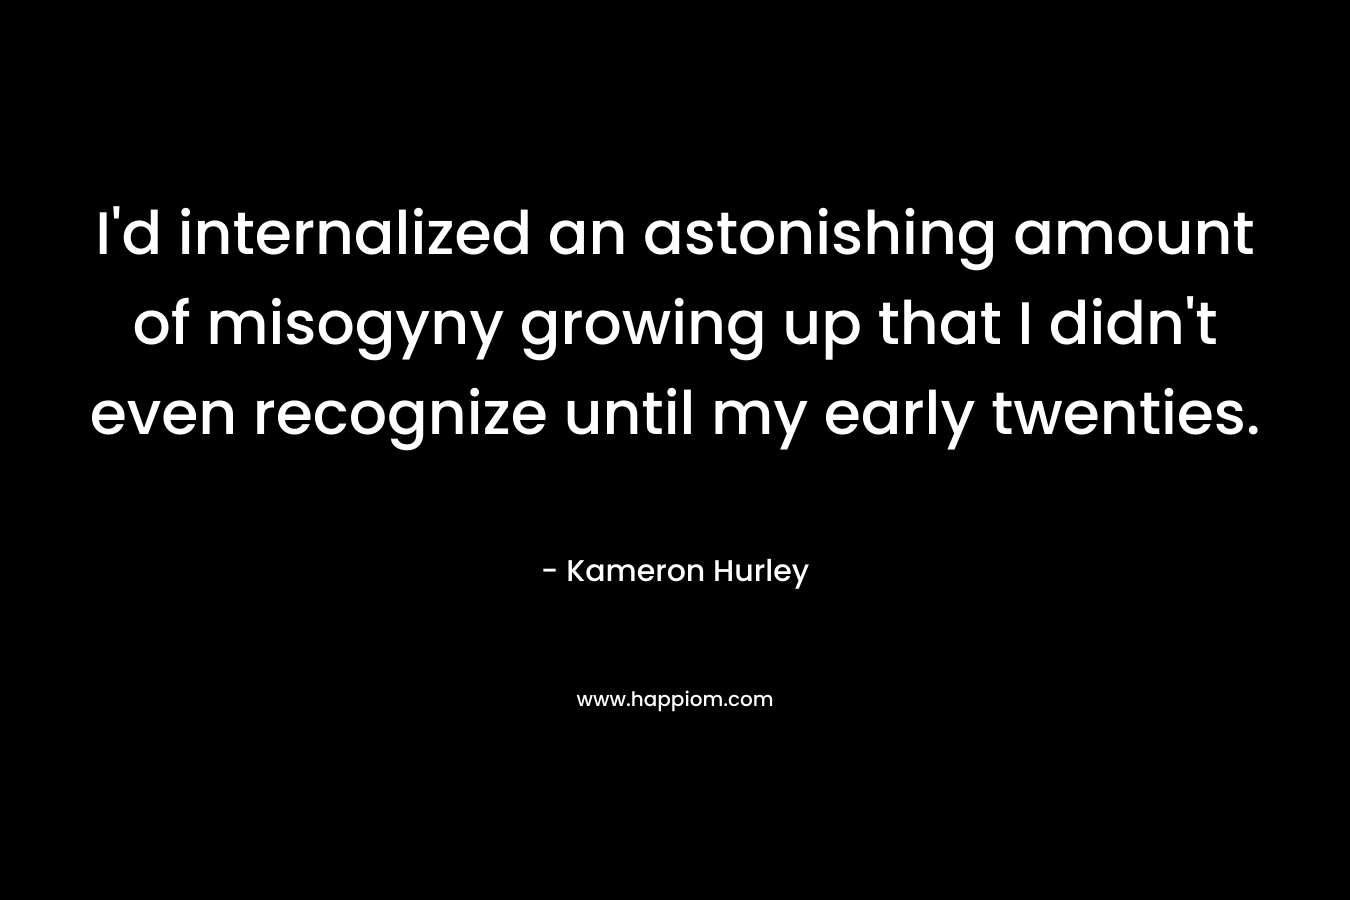 I'd internalized an astonishing amount of misogyny growing up that I didn't even recognize until my early twenties.